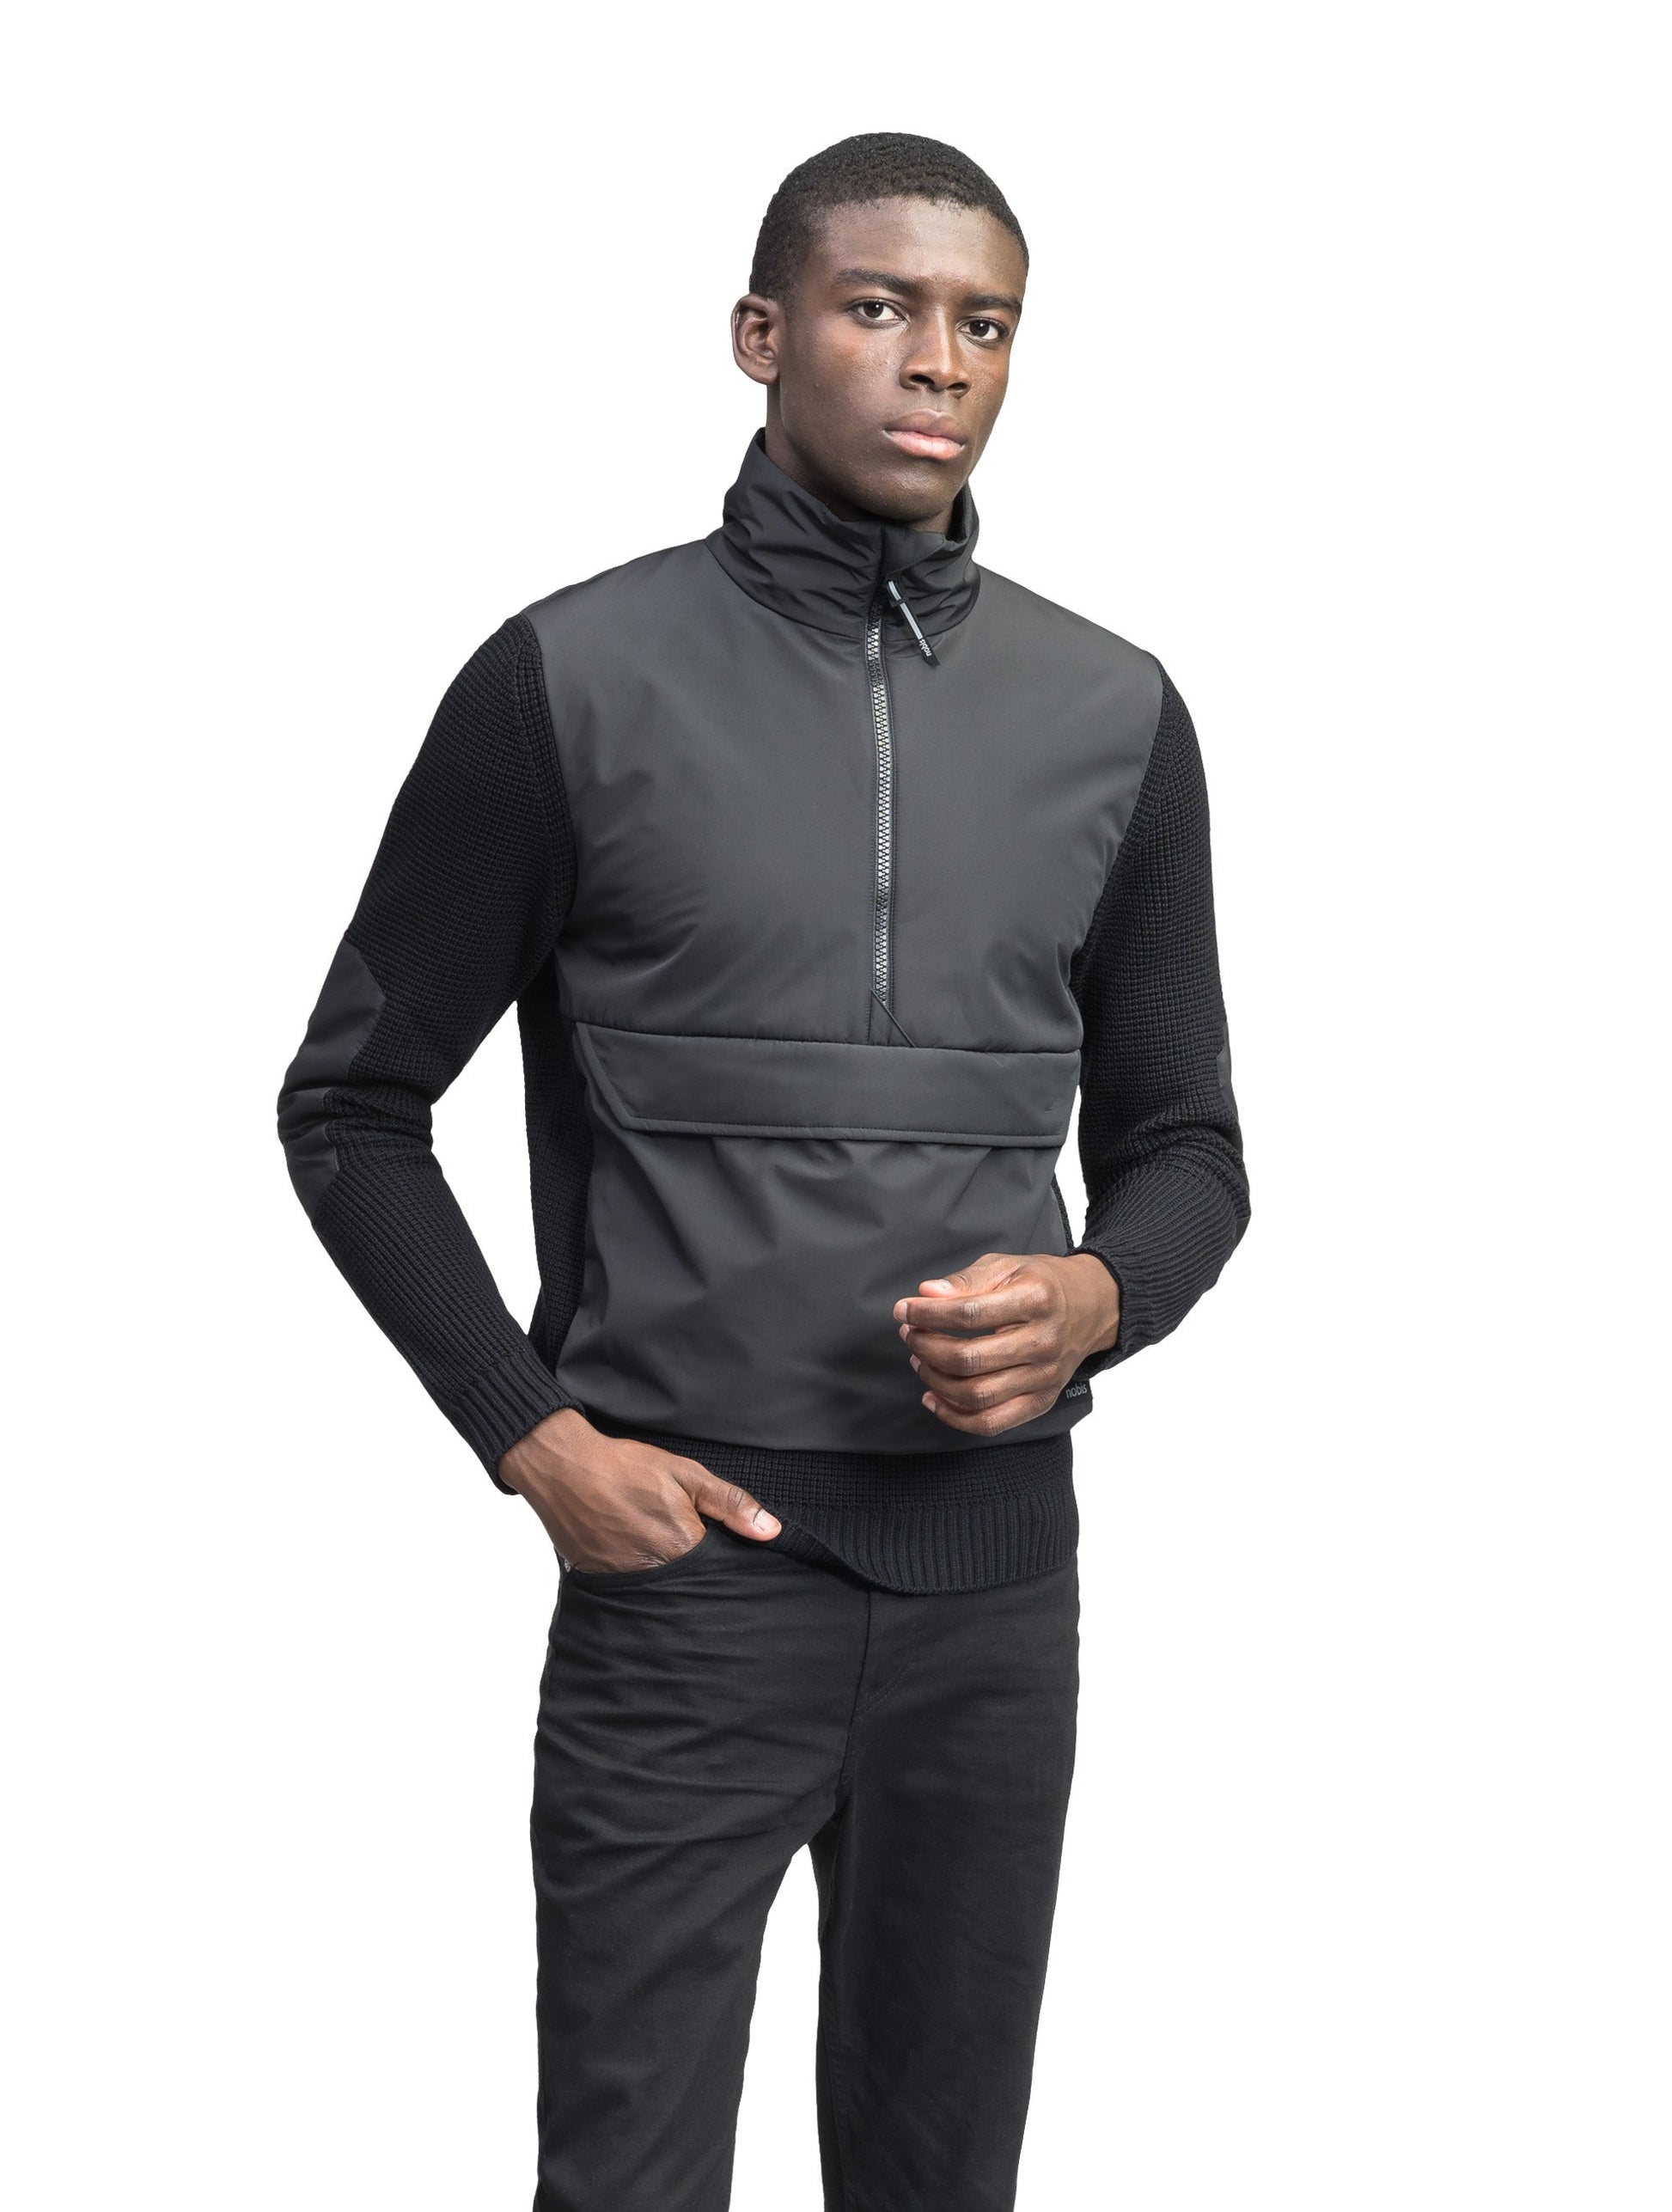 Wai Men's Performance Half Zip Sweater in hip length, 3-Ply Micro Denier and Merino wool knit fabrication, Primaloft Gold Insulation Active+, centre front zipper, flap kangaroo pocket with magnetic closure, and hidden side-entry zipper pockets at waist, in Black